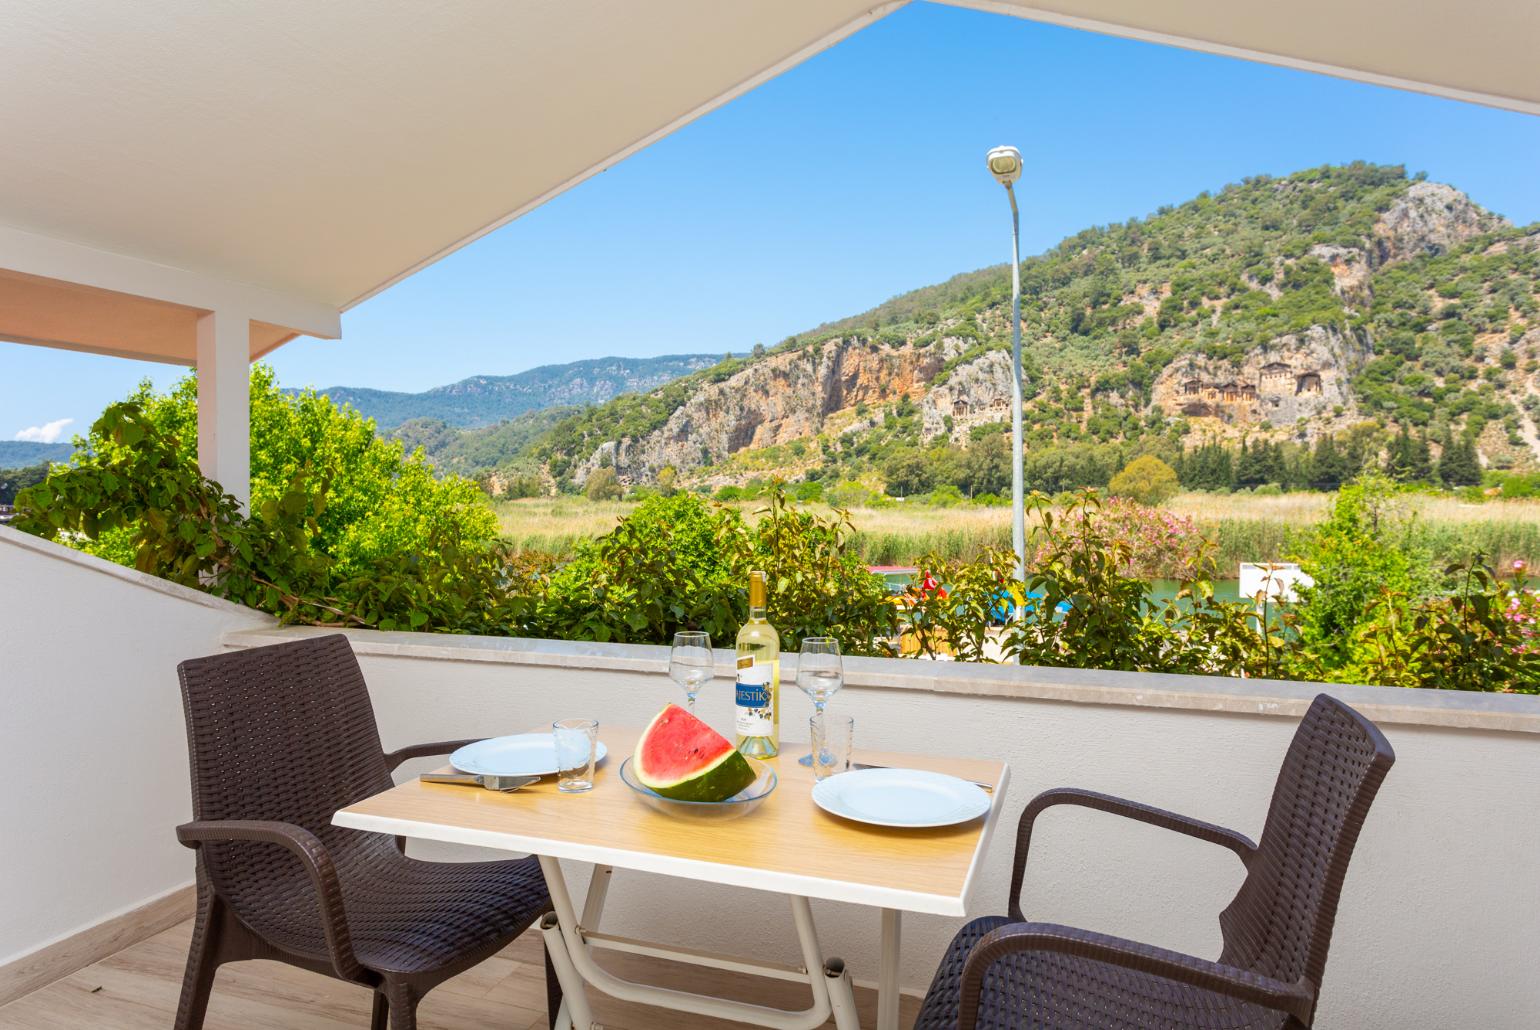 Upper sheltered terrace with views of Dalyan river and the ancient Lycian rock tombs